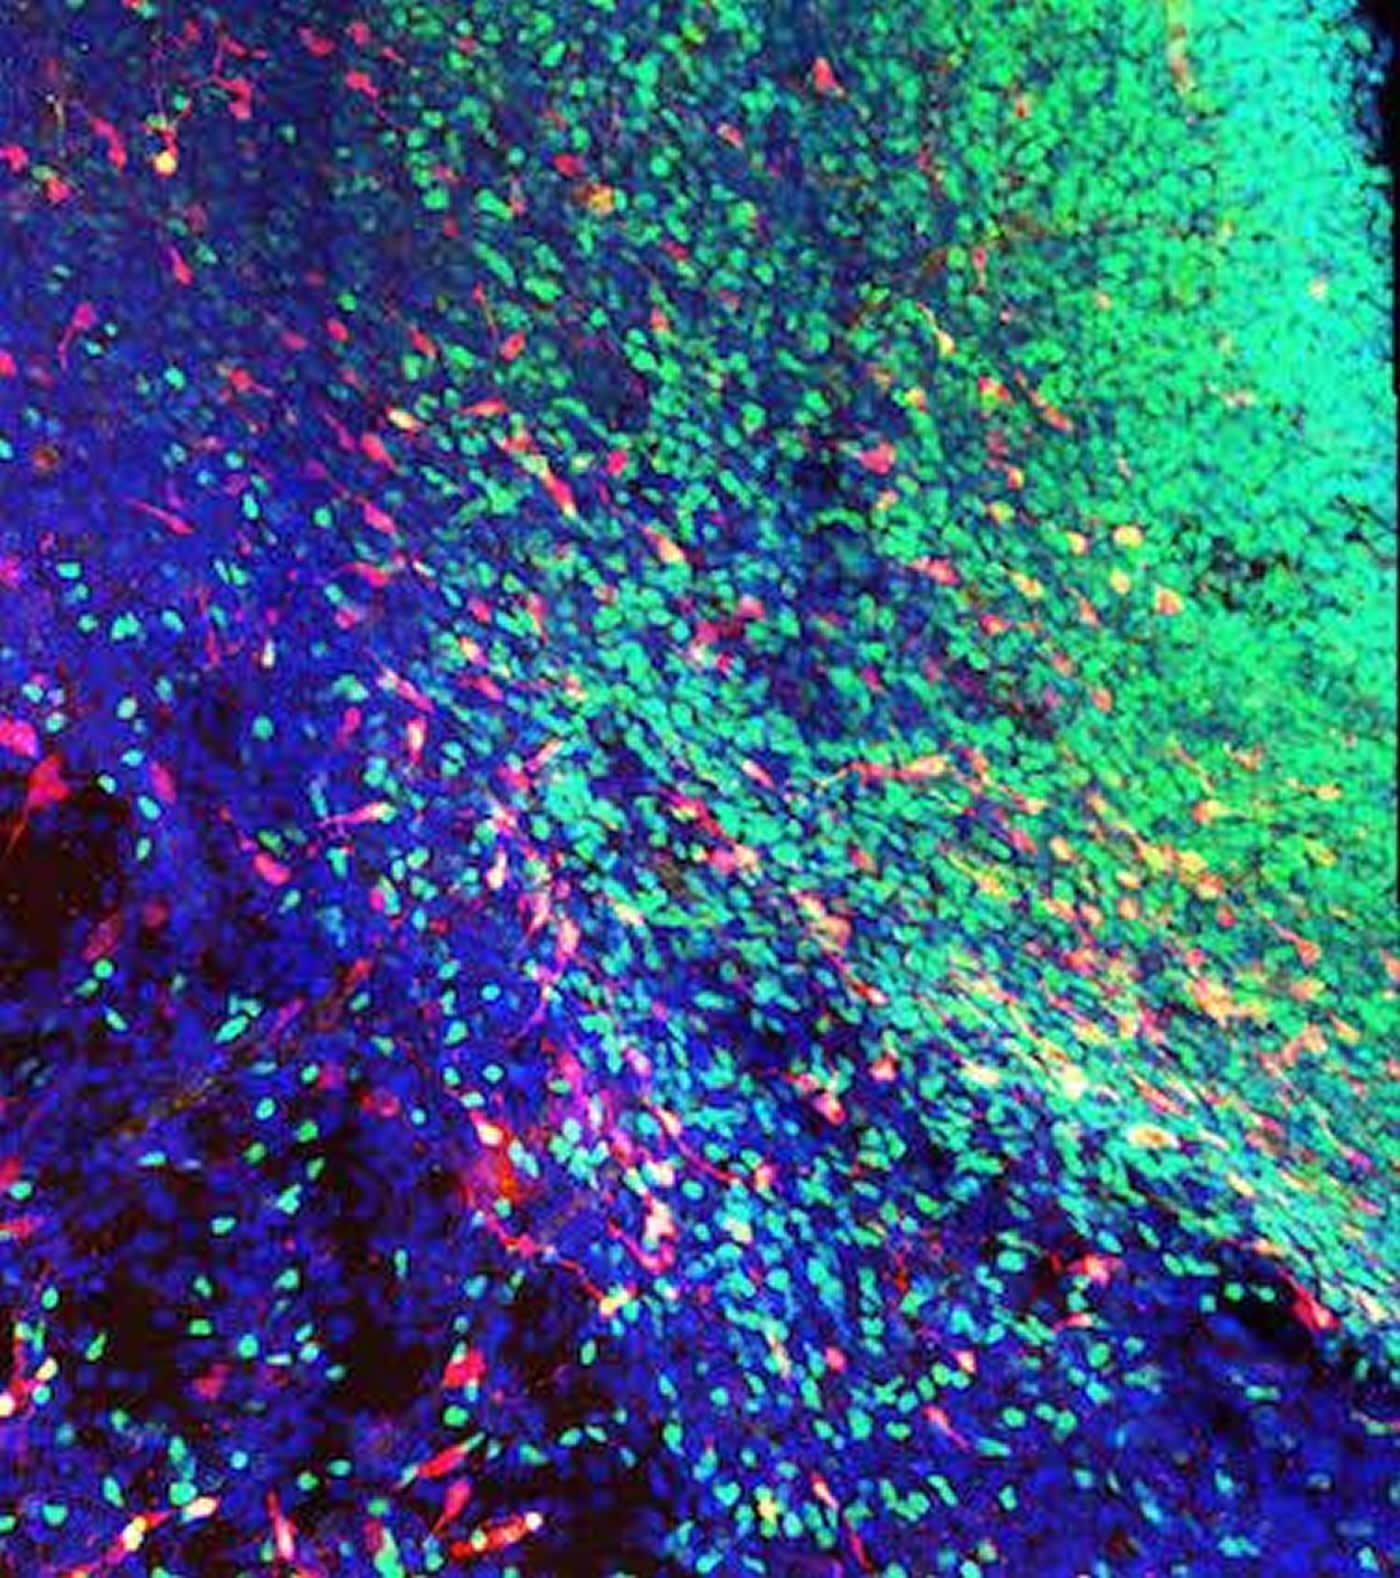 This image shows the interneurons migrating to the striatum.